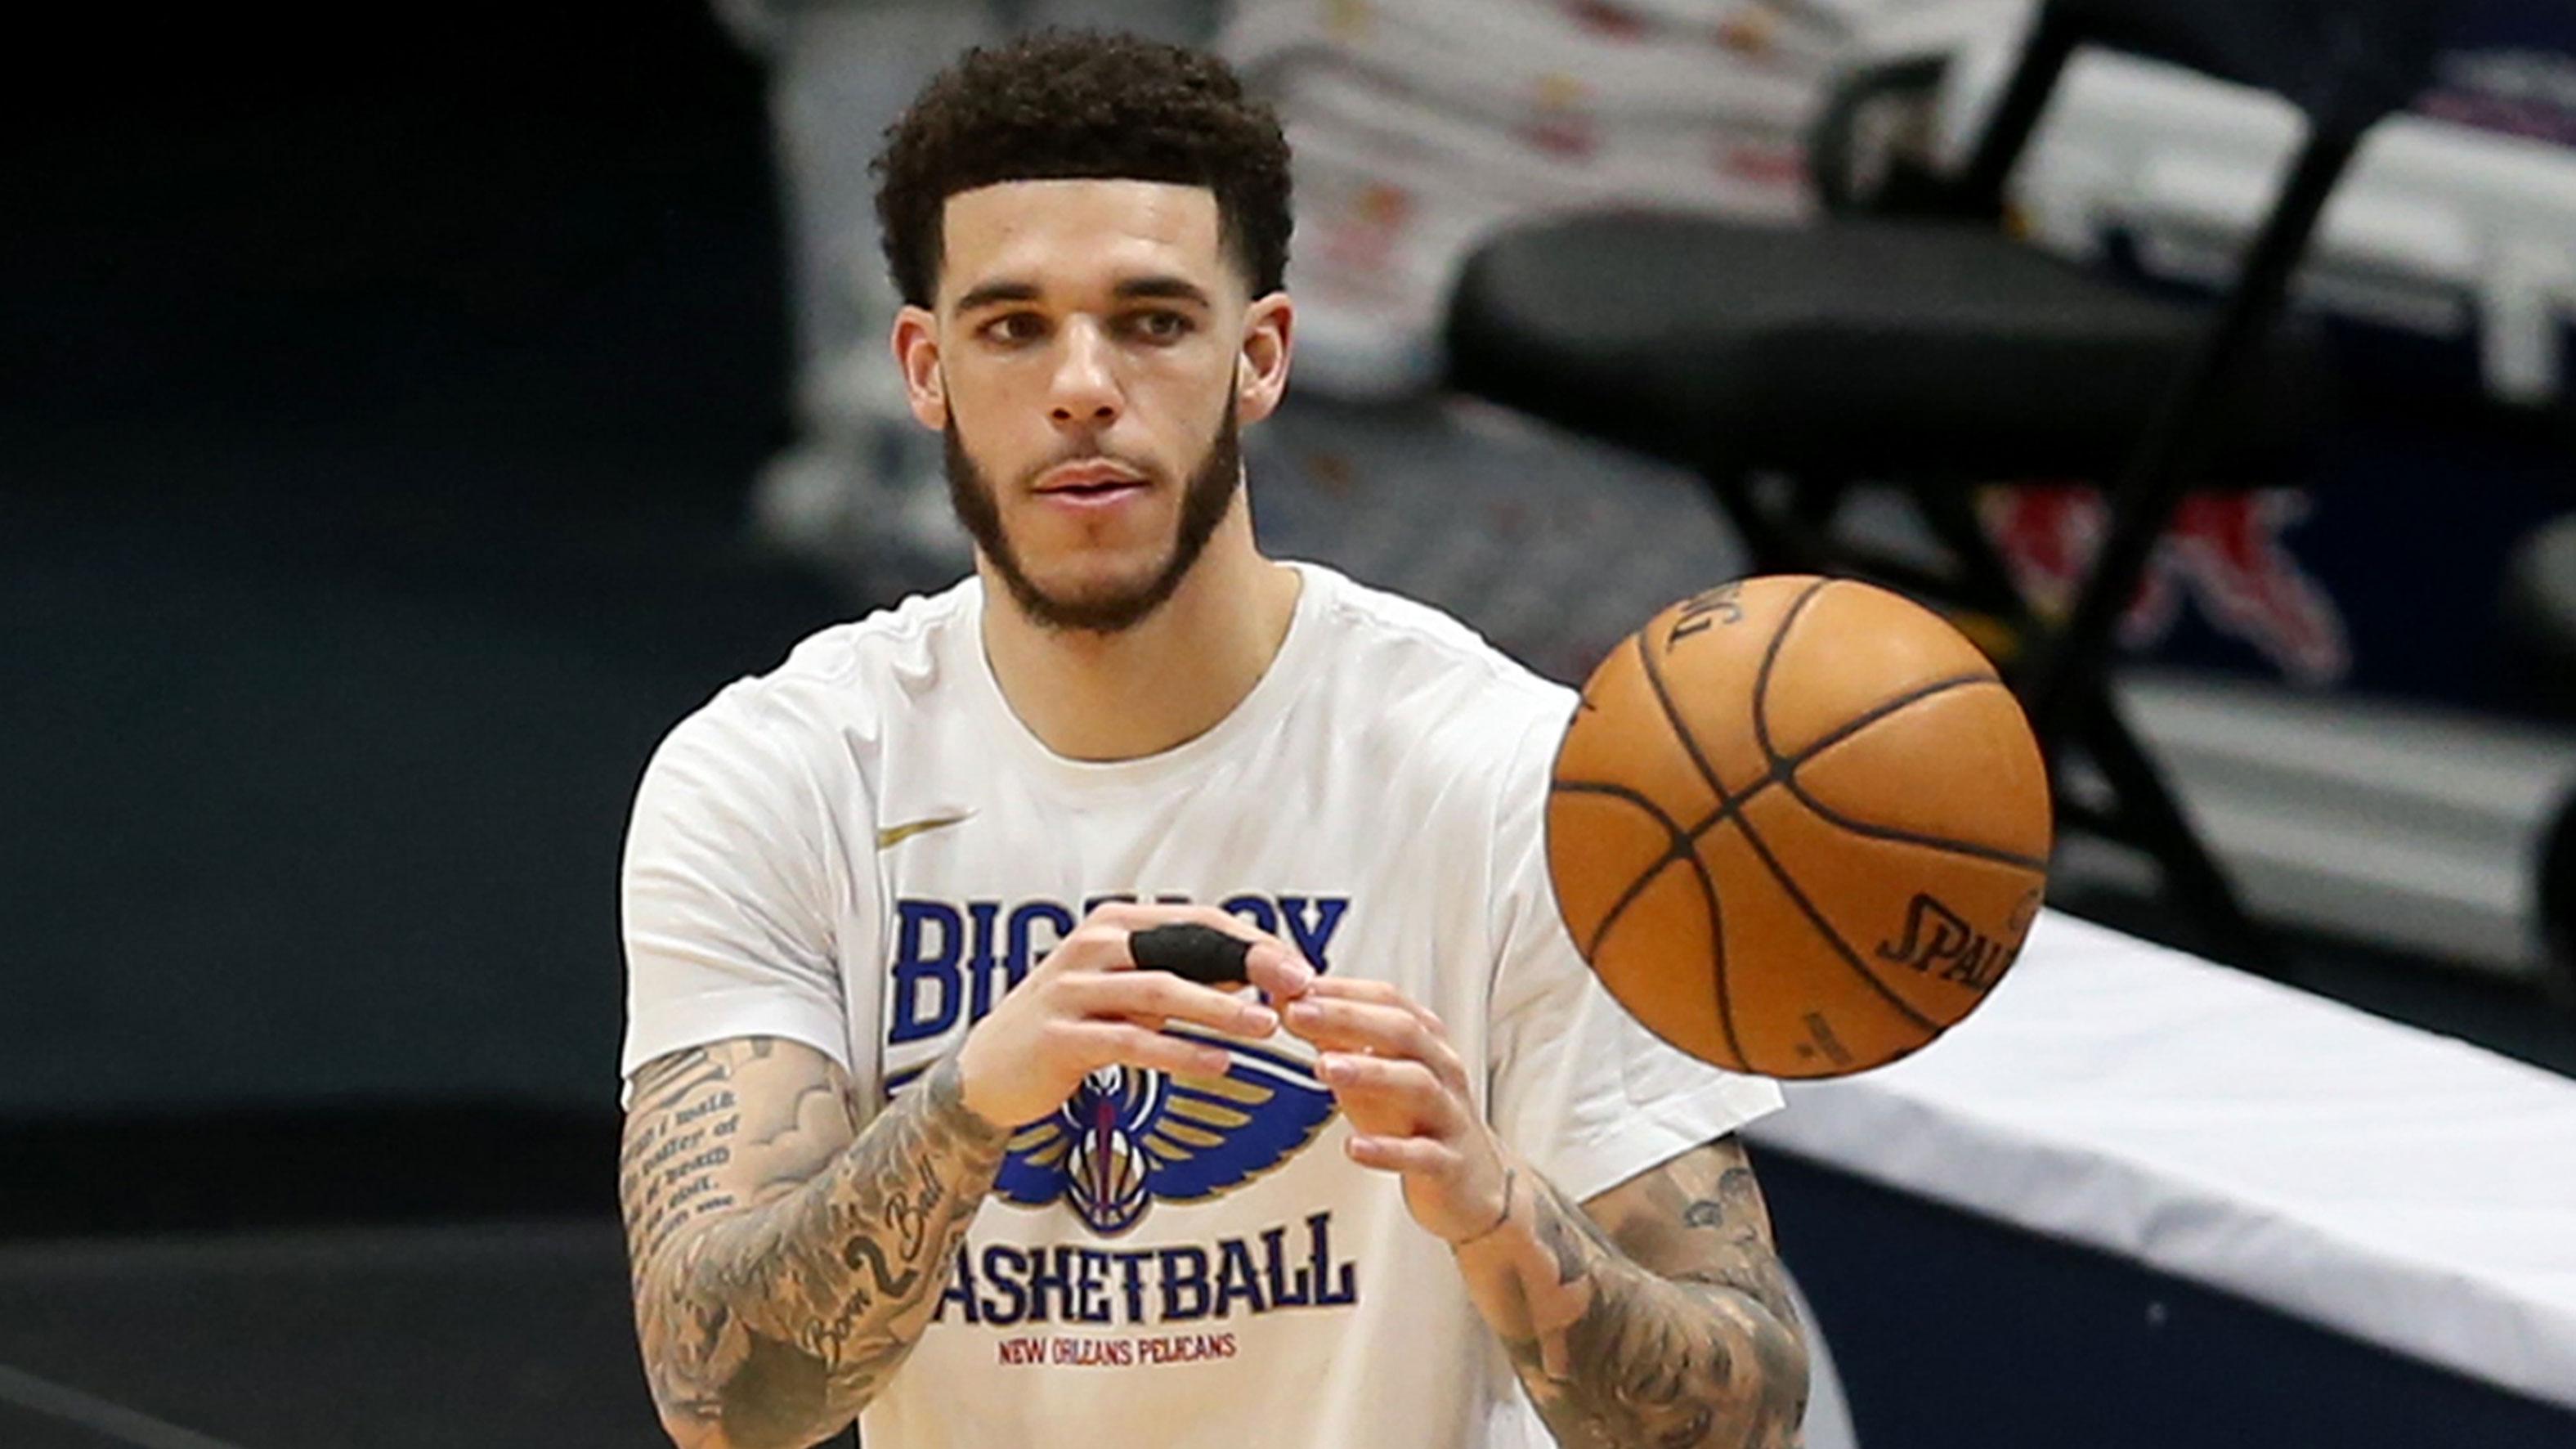 Mar 26, 2021; New Orleans, Louisiana, USA; New Orleans Pelicans guard Lonzo Ball warms up before their game against the Denver Nuggets at the Smoothie King Center. / Chuck Cook-USA TODAY Sports